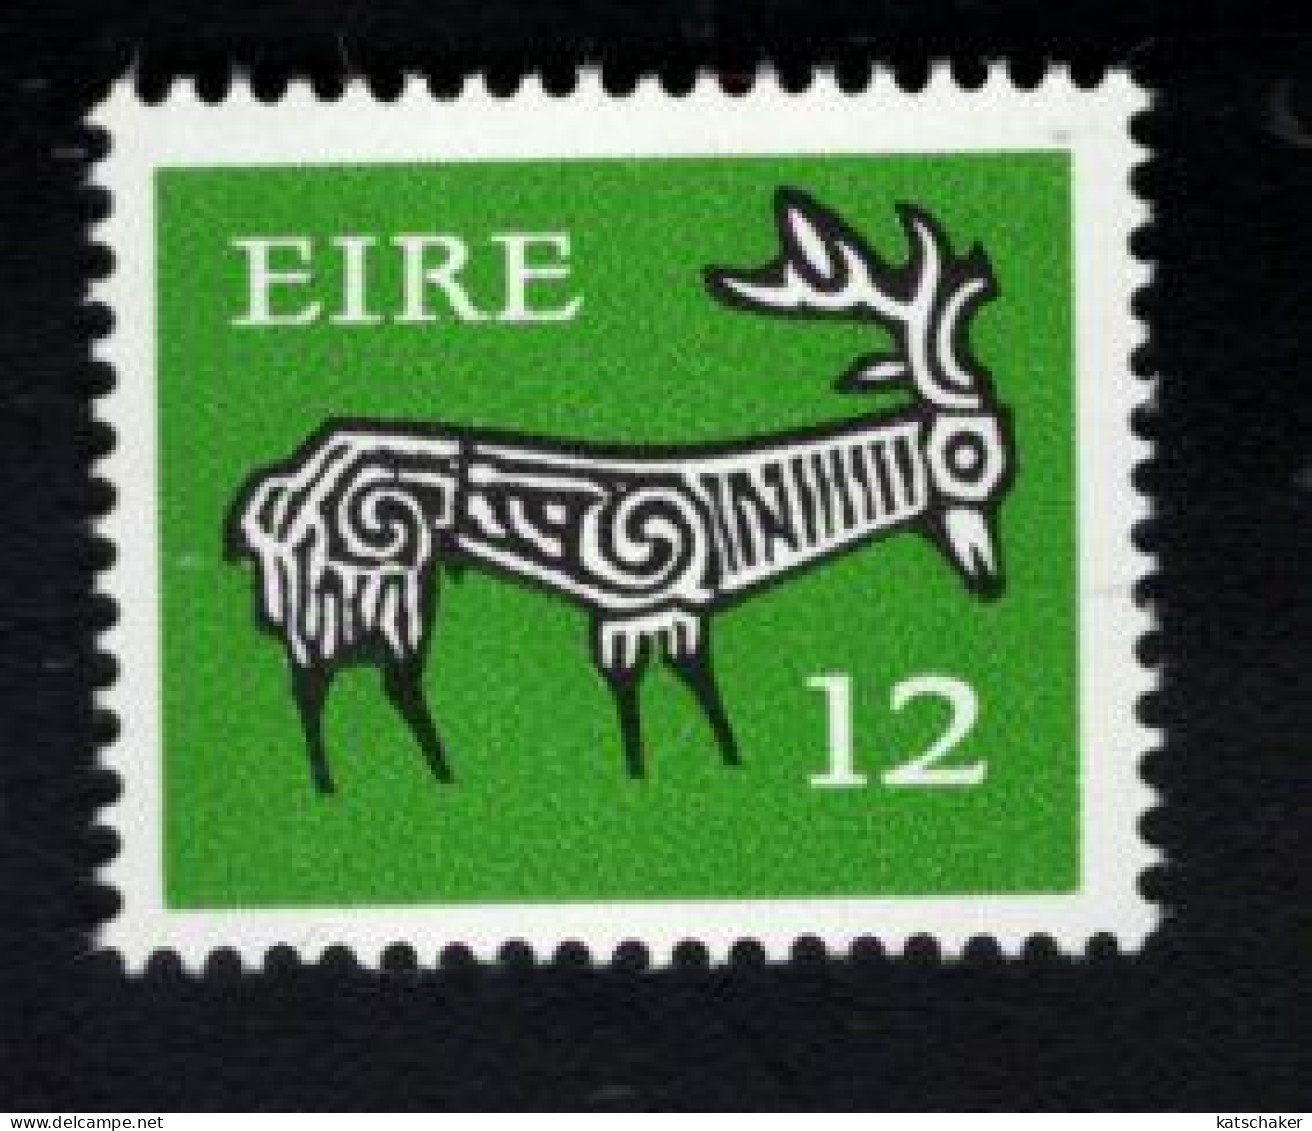 2001079553  1974  SCOTT 302A (XX) POSTFRIS  MINT NEVER HINGED - CURRENCY ISSUE - STAG - Unused Stamps